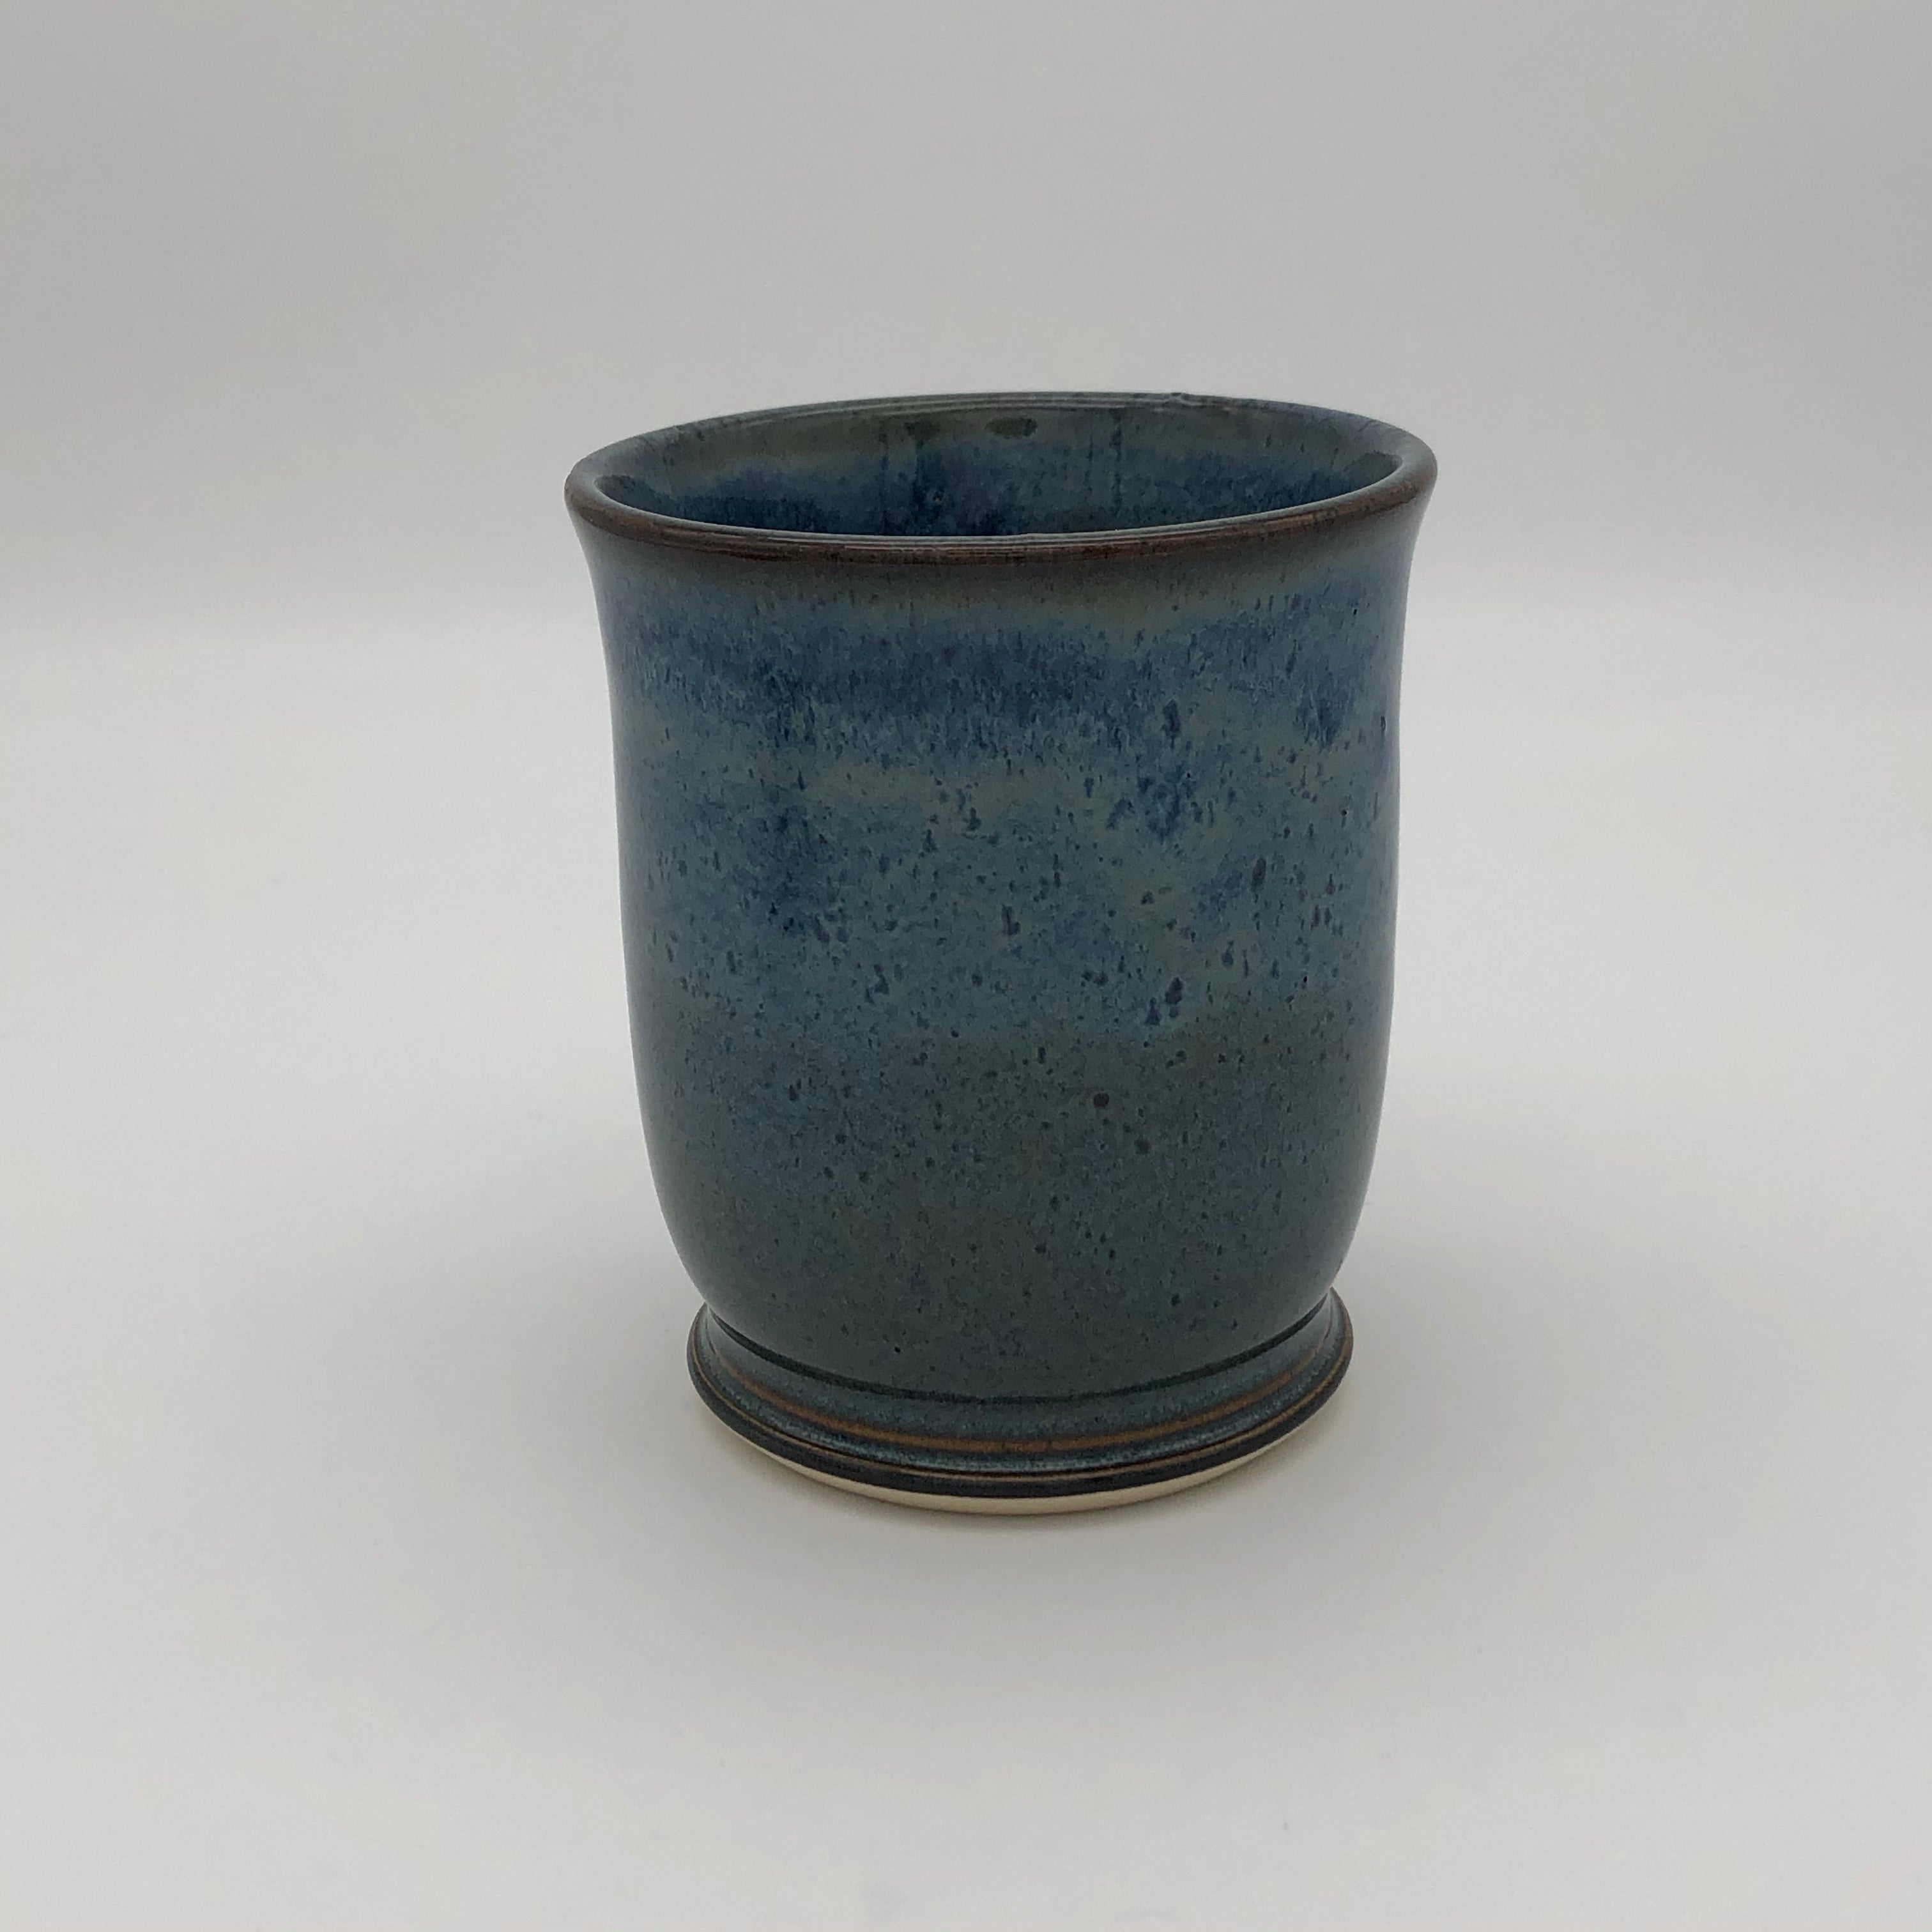 8 oz. cup in Floating Blue